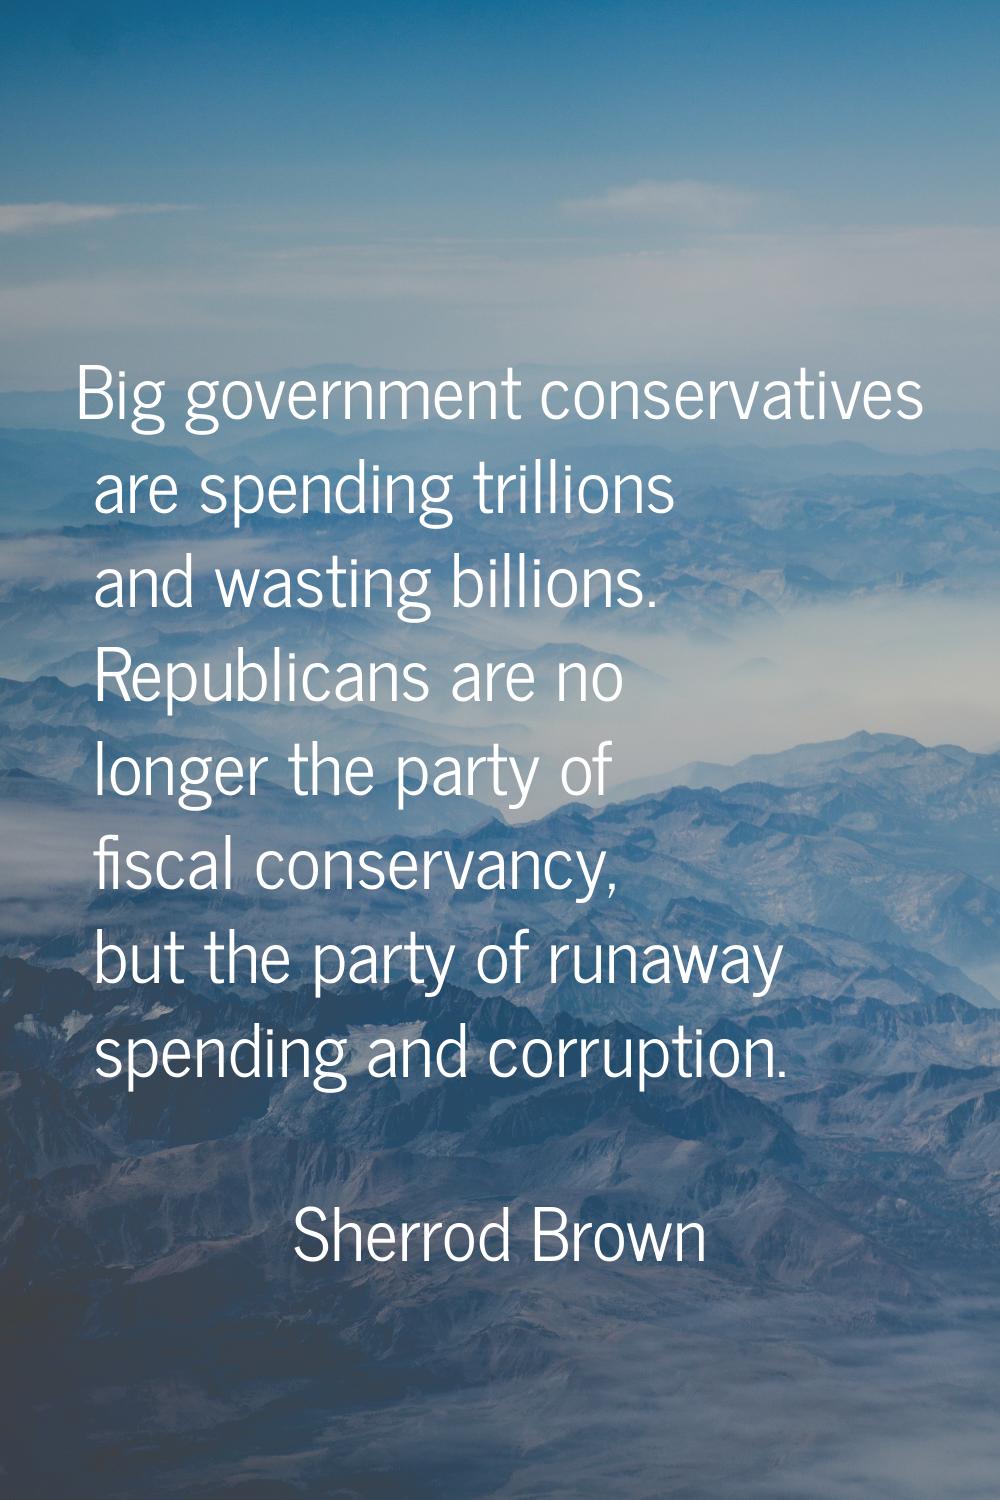 Big government conservatives are spending trillions and wasting billions. Republicans are no longer